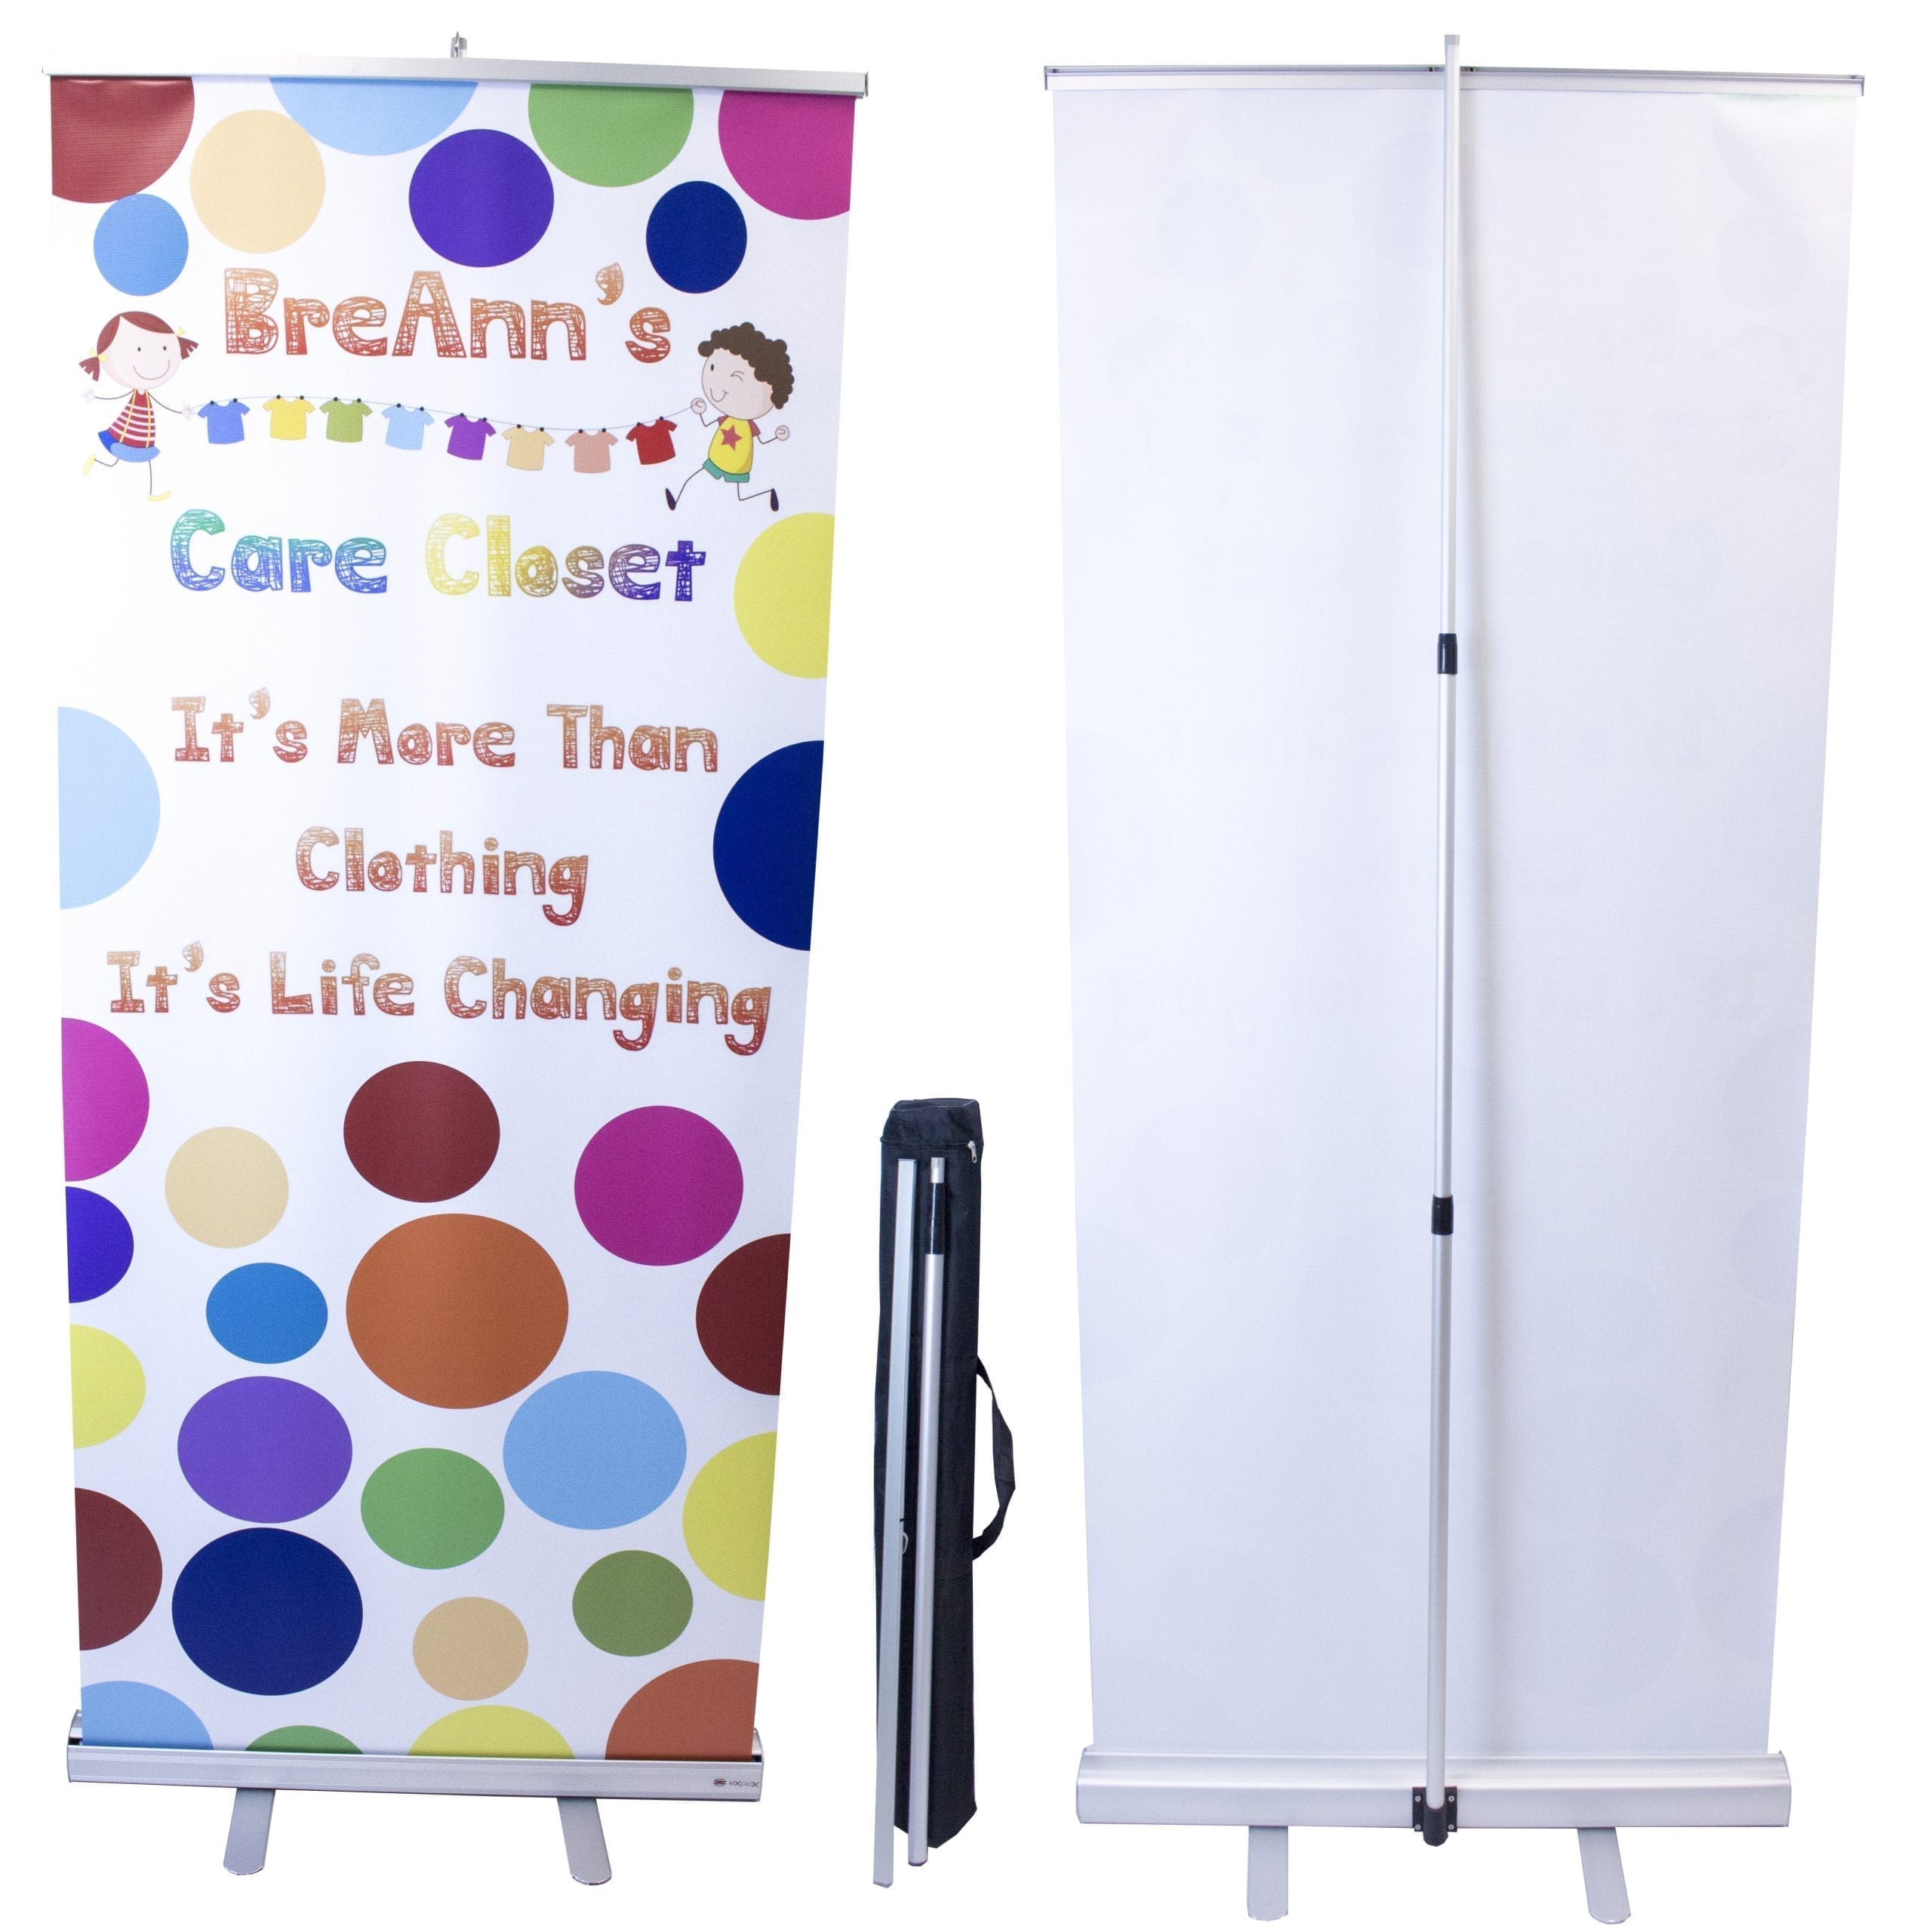 rush trade show banner stand bdr33s retractable banner stand